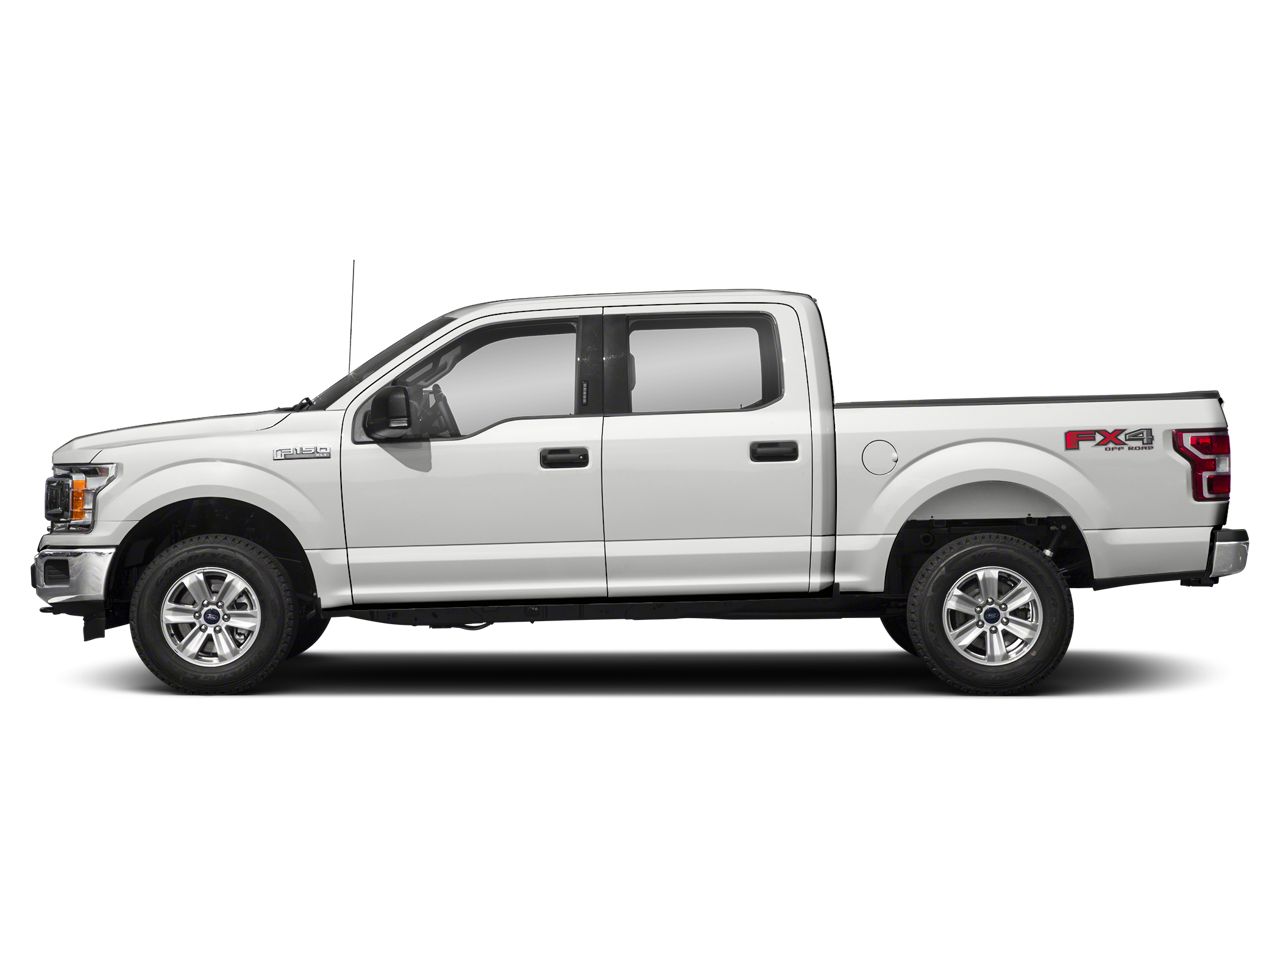 2019 Ford F-150 XLT 302A